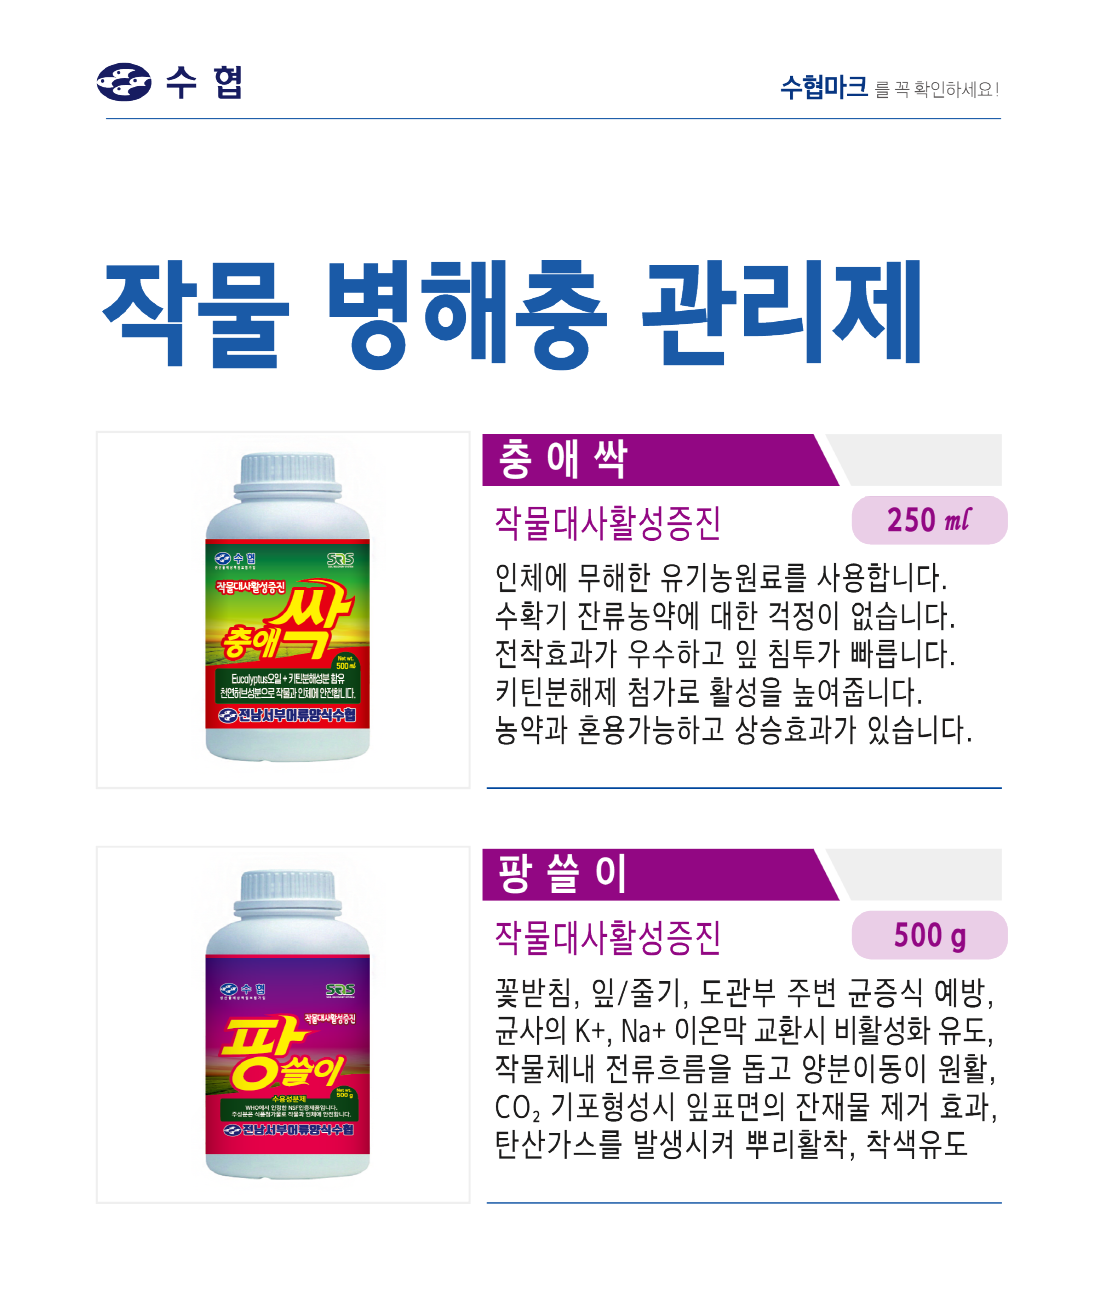 http://suhyup2019.handpr.kr/bs/se2/imgup/1589964642det2_s.png